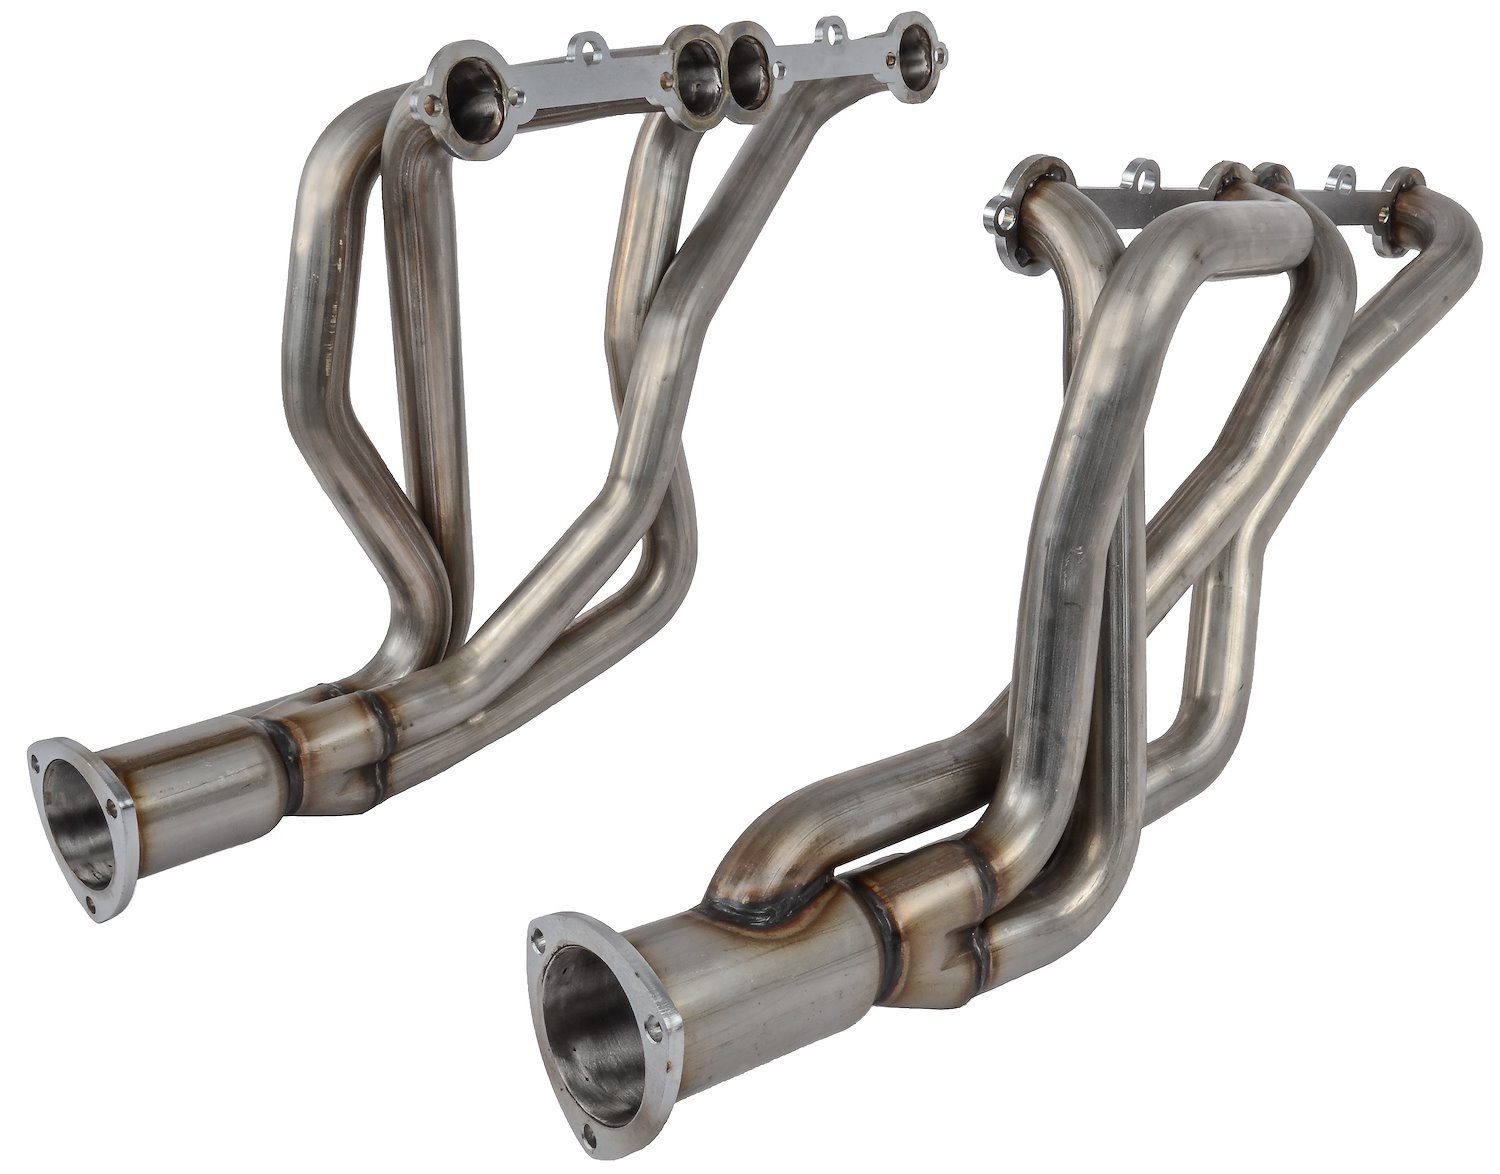 Stainless Steel Long Tube Headers for 1973-1991 GM Truck with Small Block Chevy 265-400